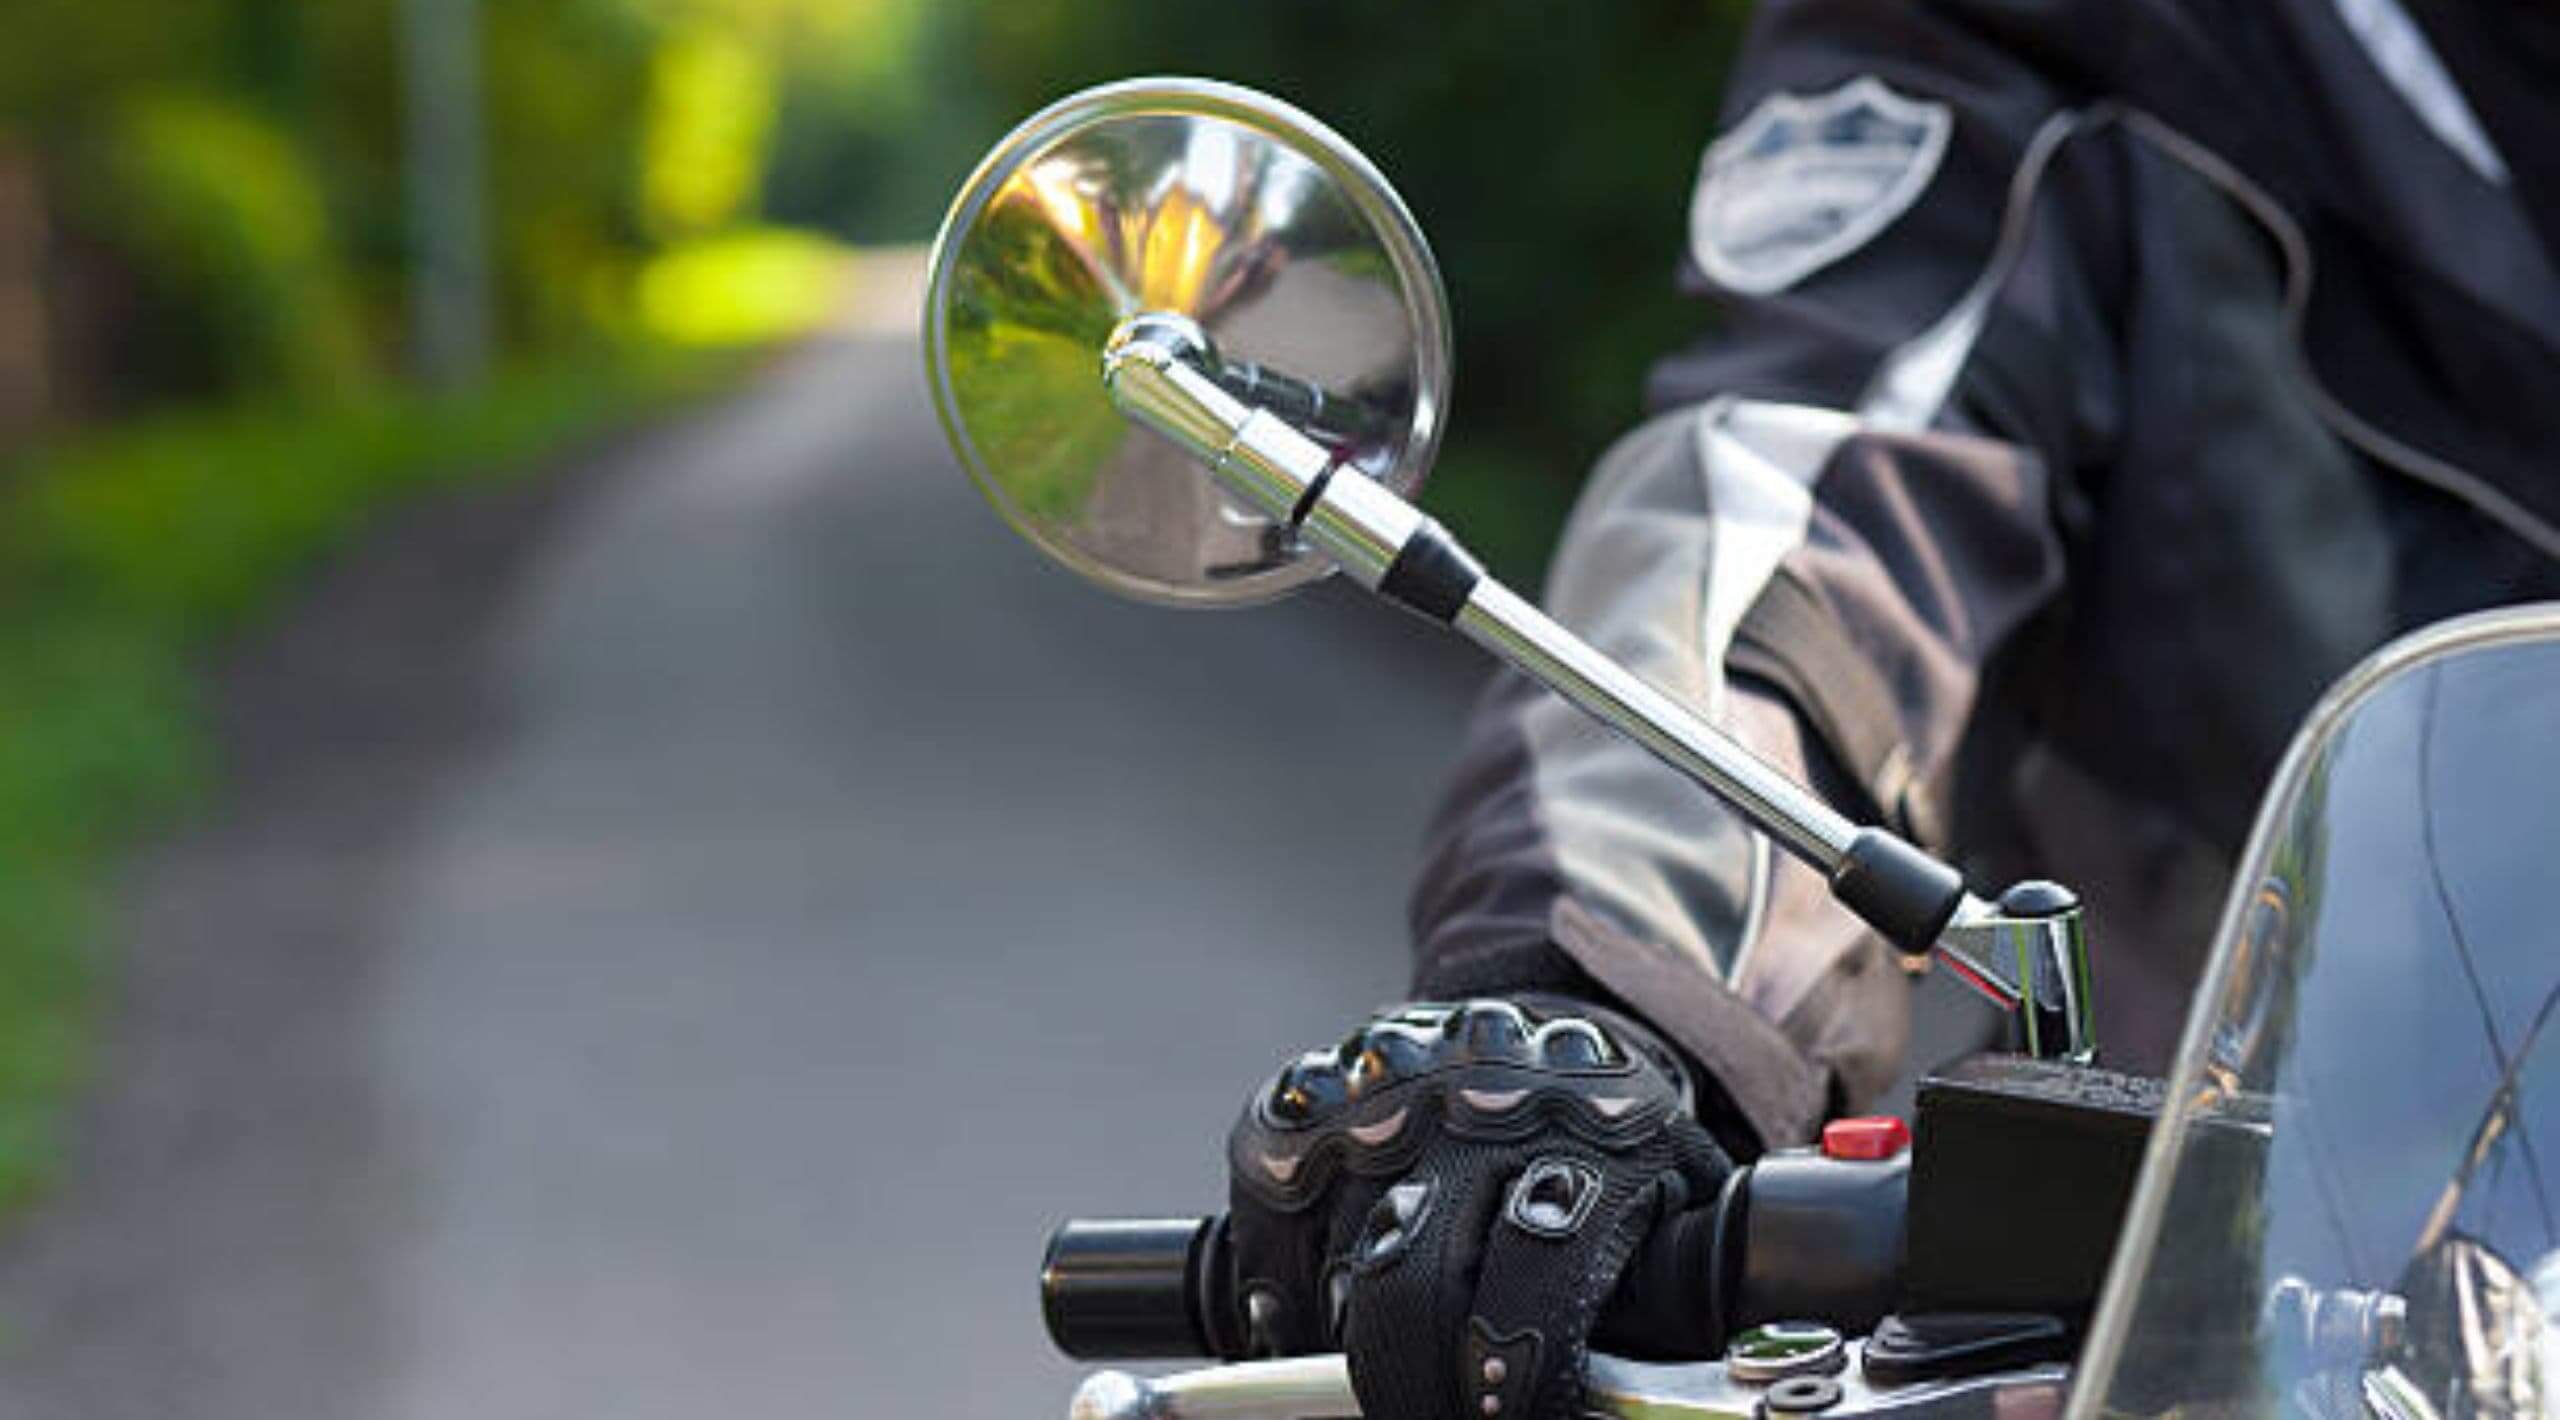 Do You Need Mirrors on a Motorcycle Safety and Legal Requirements